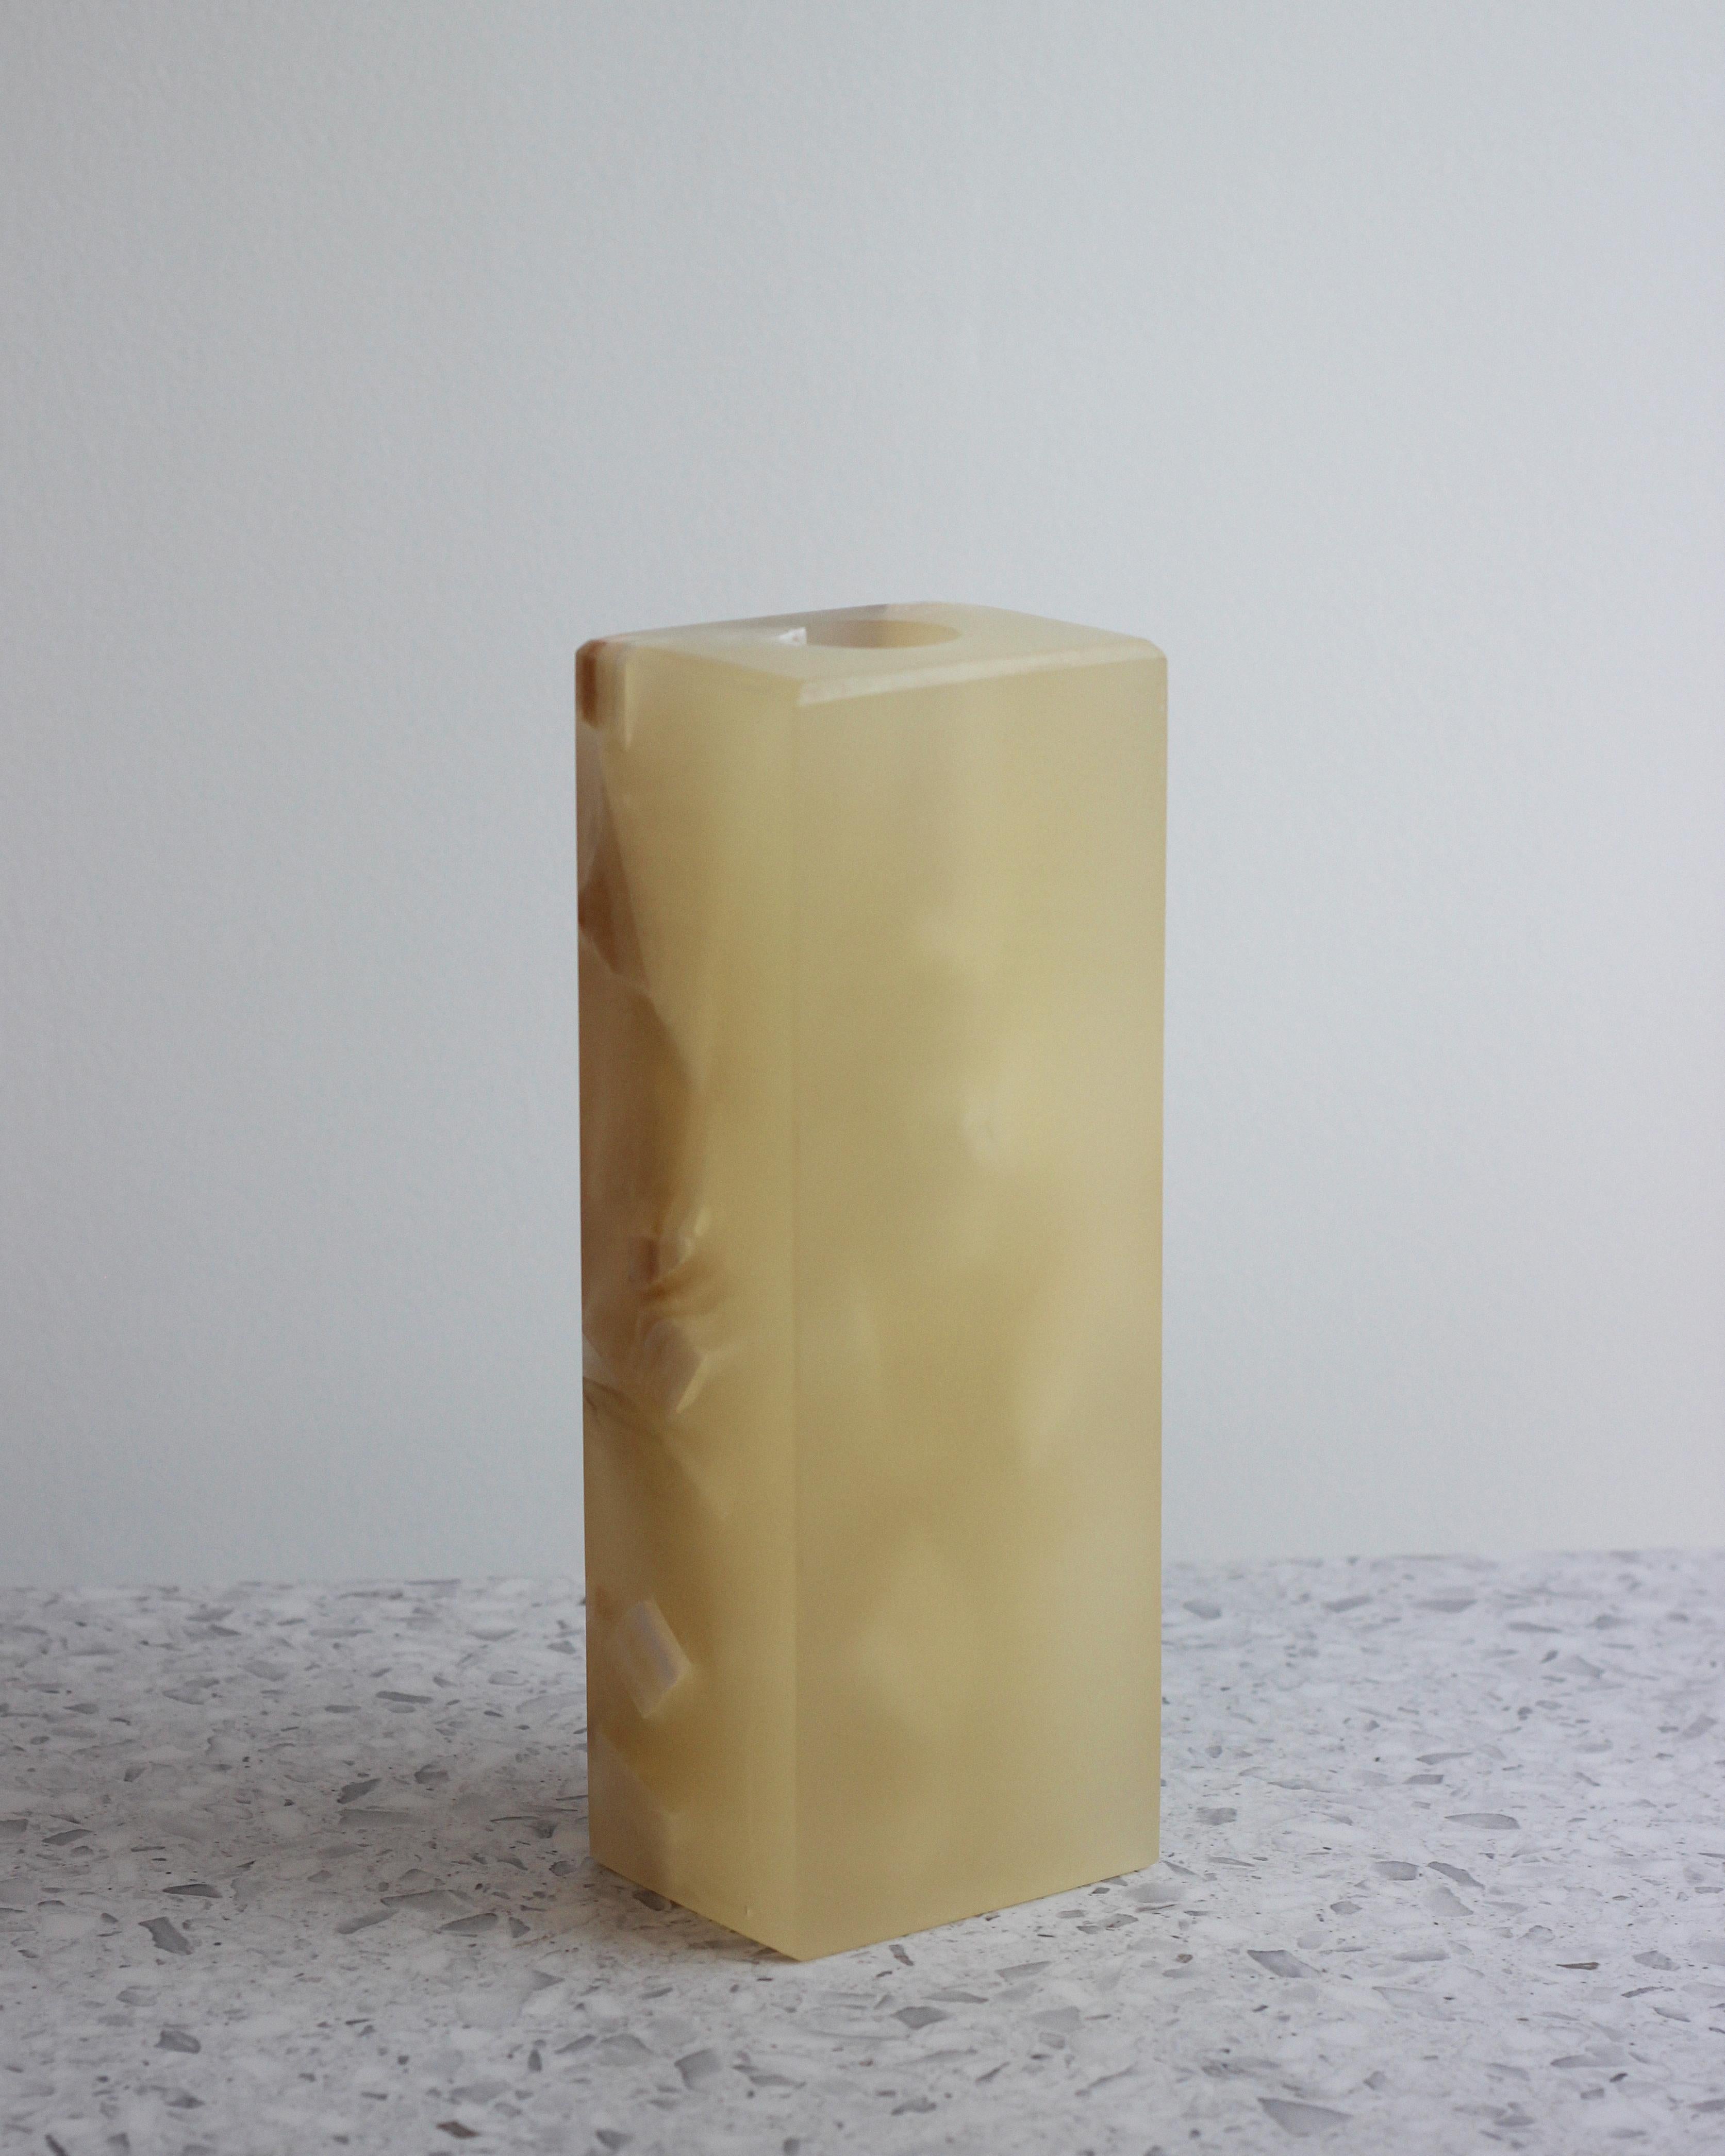 Crystal marble fragment vase by Jang Hea Kyoung
Artist: Jang Hea Kyoung
Materials: Crystal resin and marble
Dimensions: 24 x 9 x 7 cm

Jang Hea Kyoung is based in Seoul, Republic of Korea. She searches for Craft elements and makes modern object